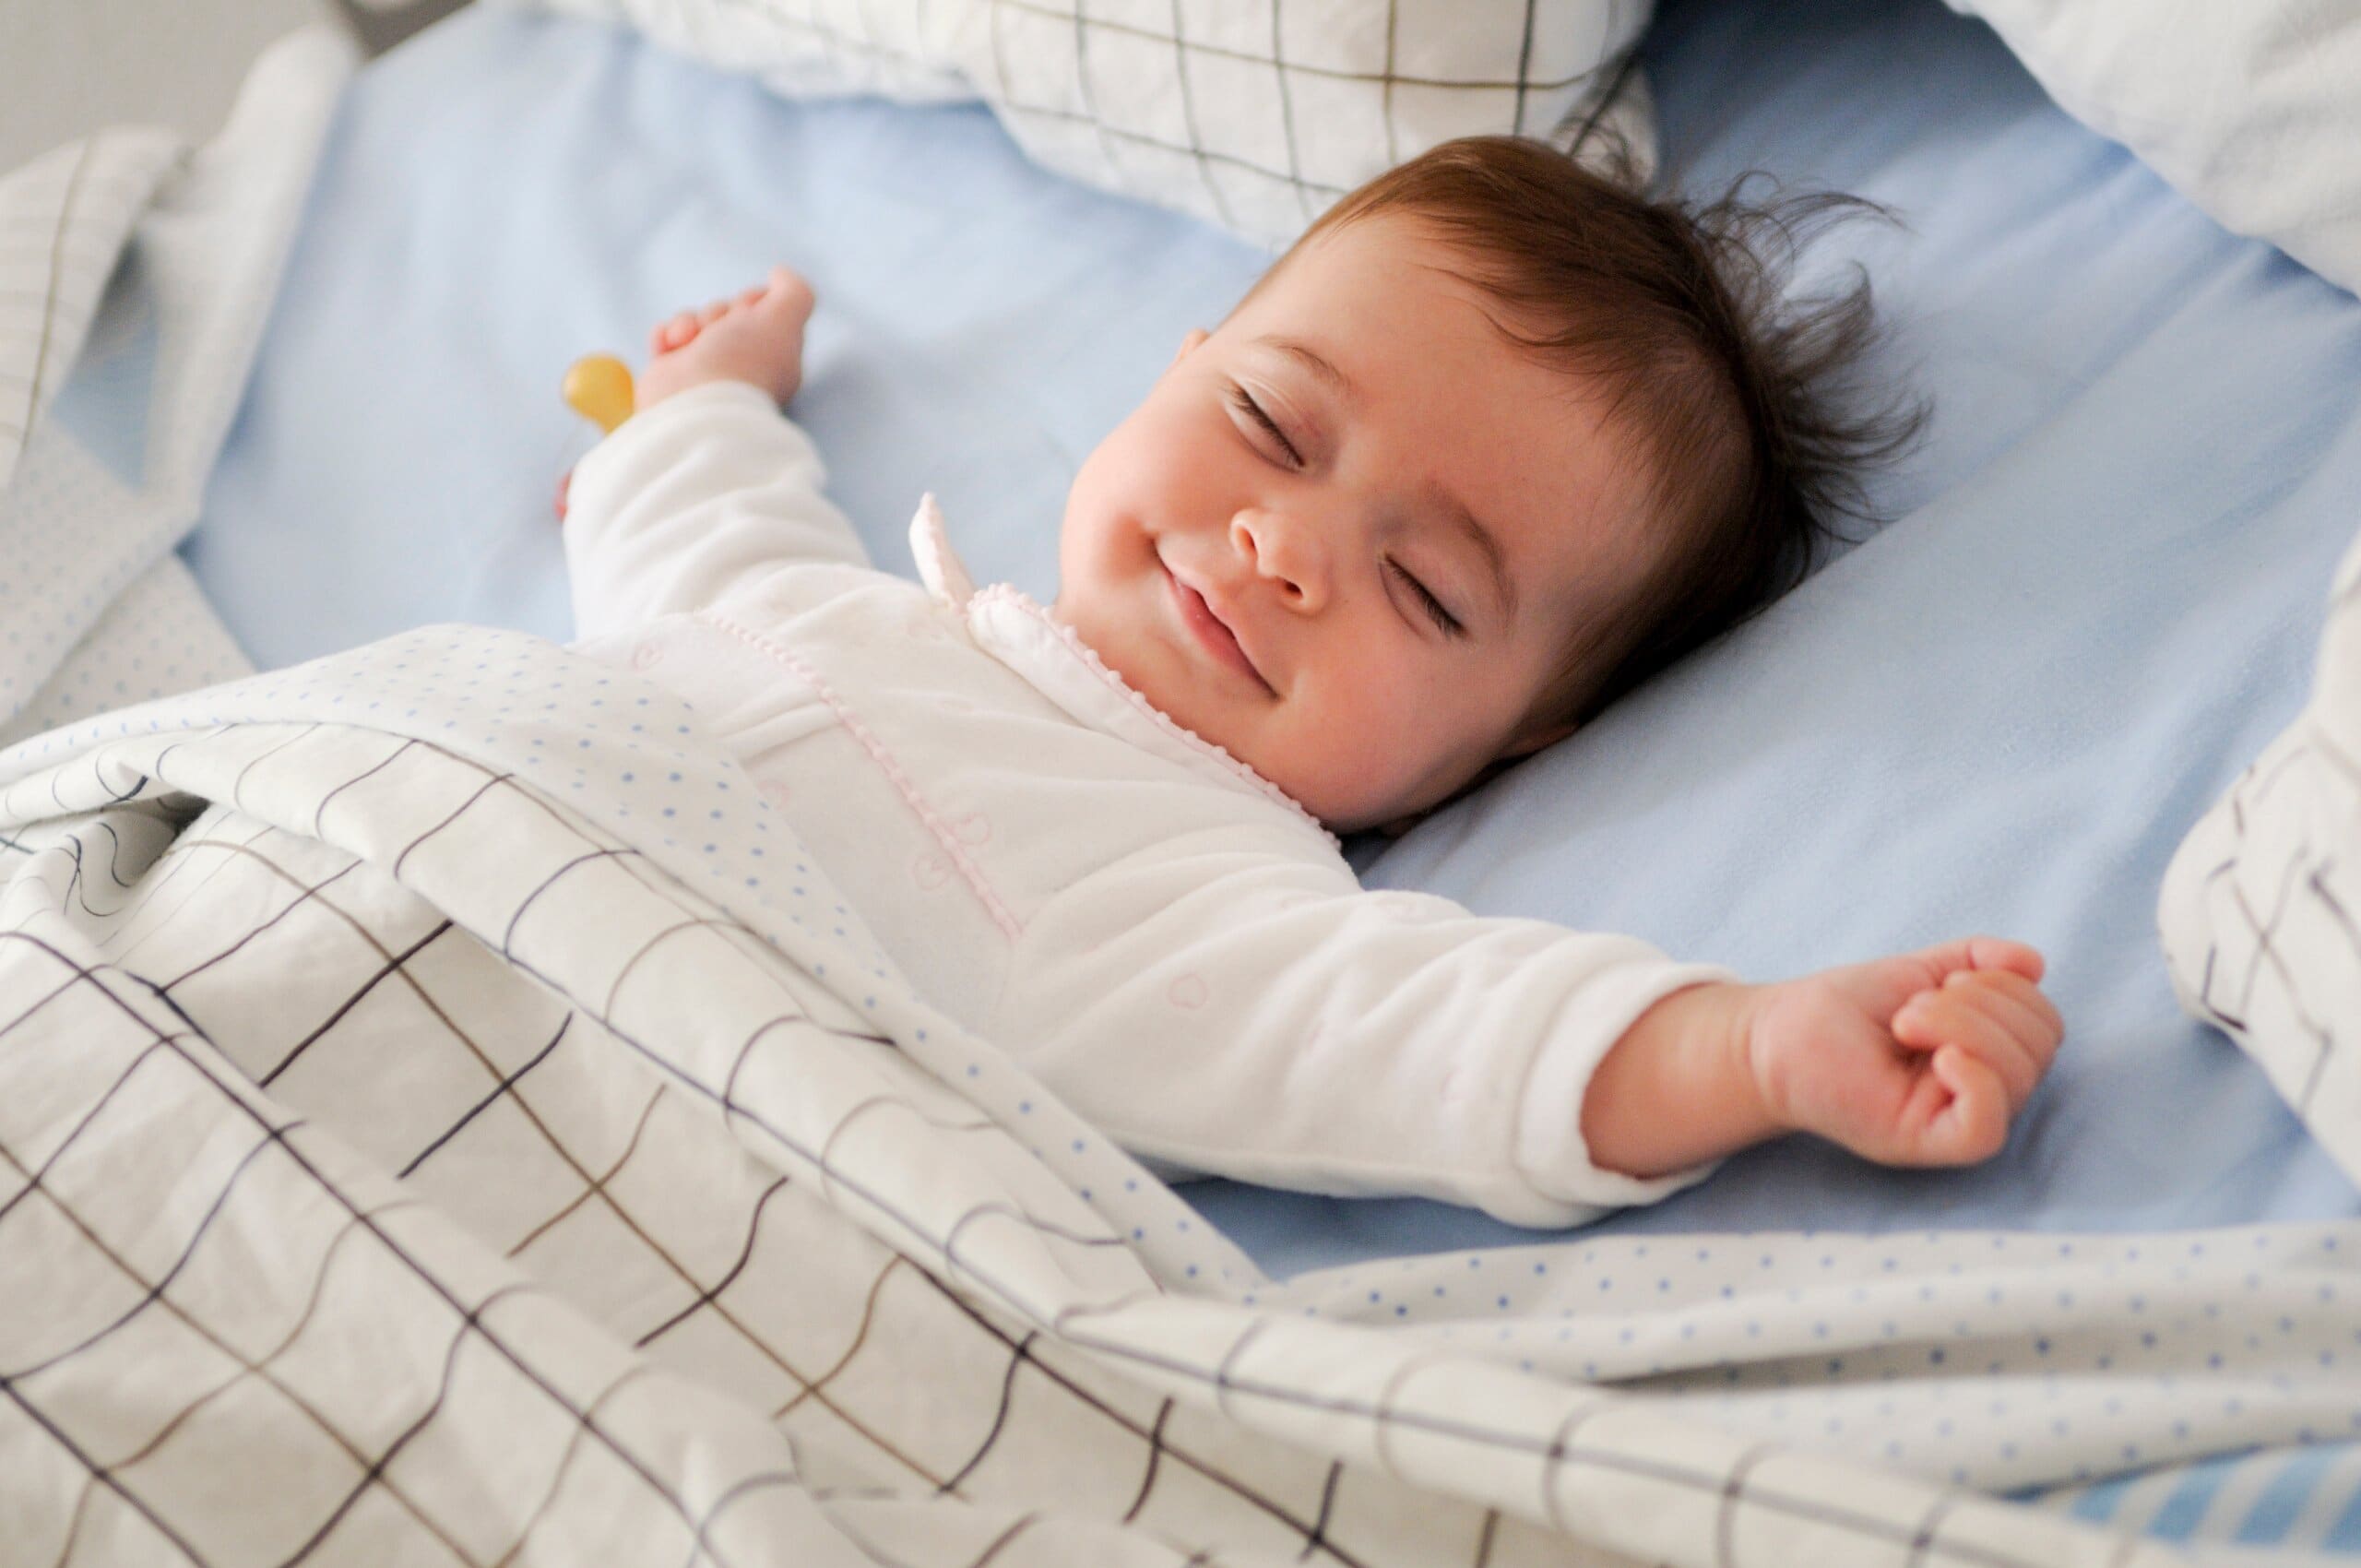 Smiling baby with arms stretched out laying in bed.